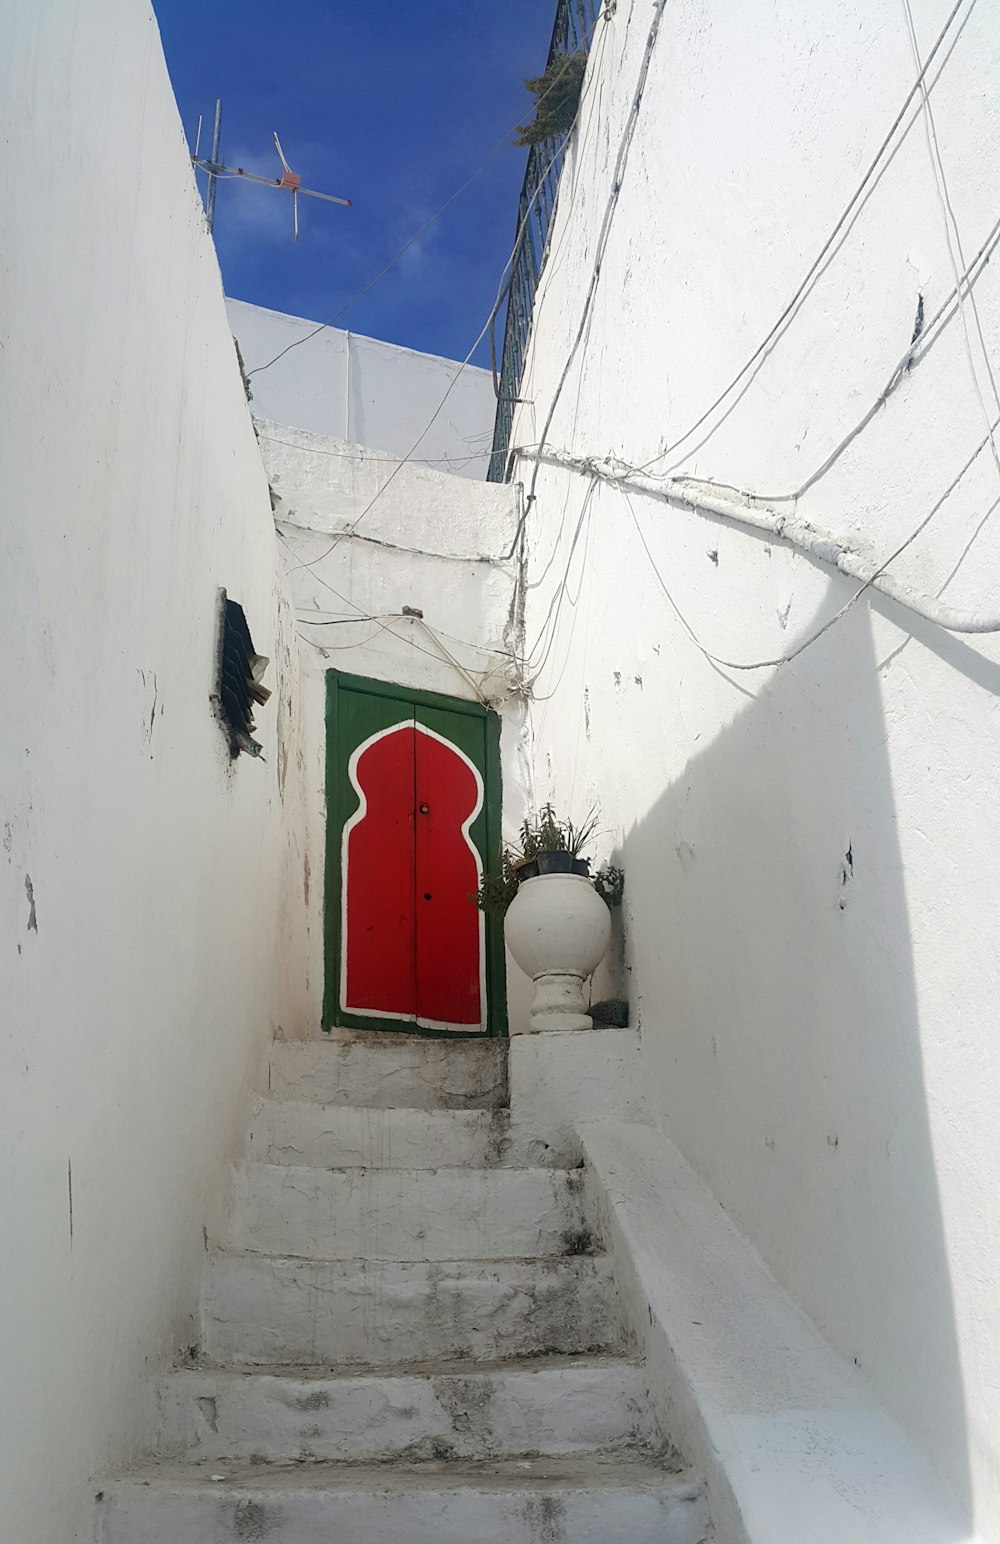 red-and-green door near white wall